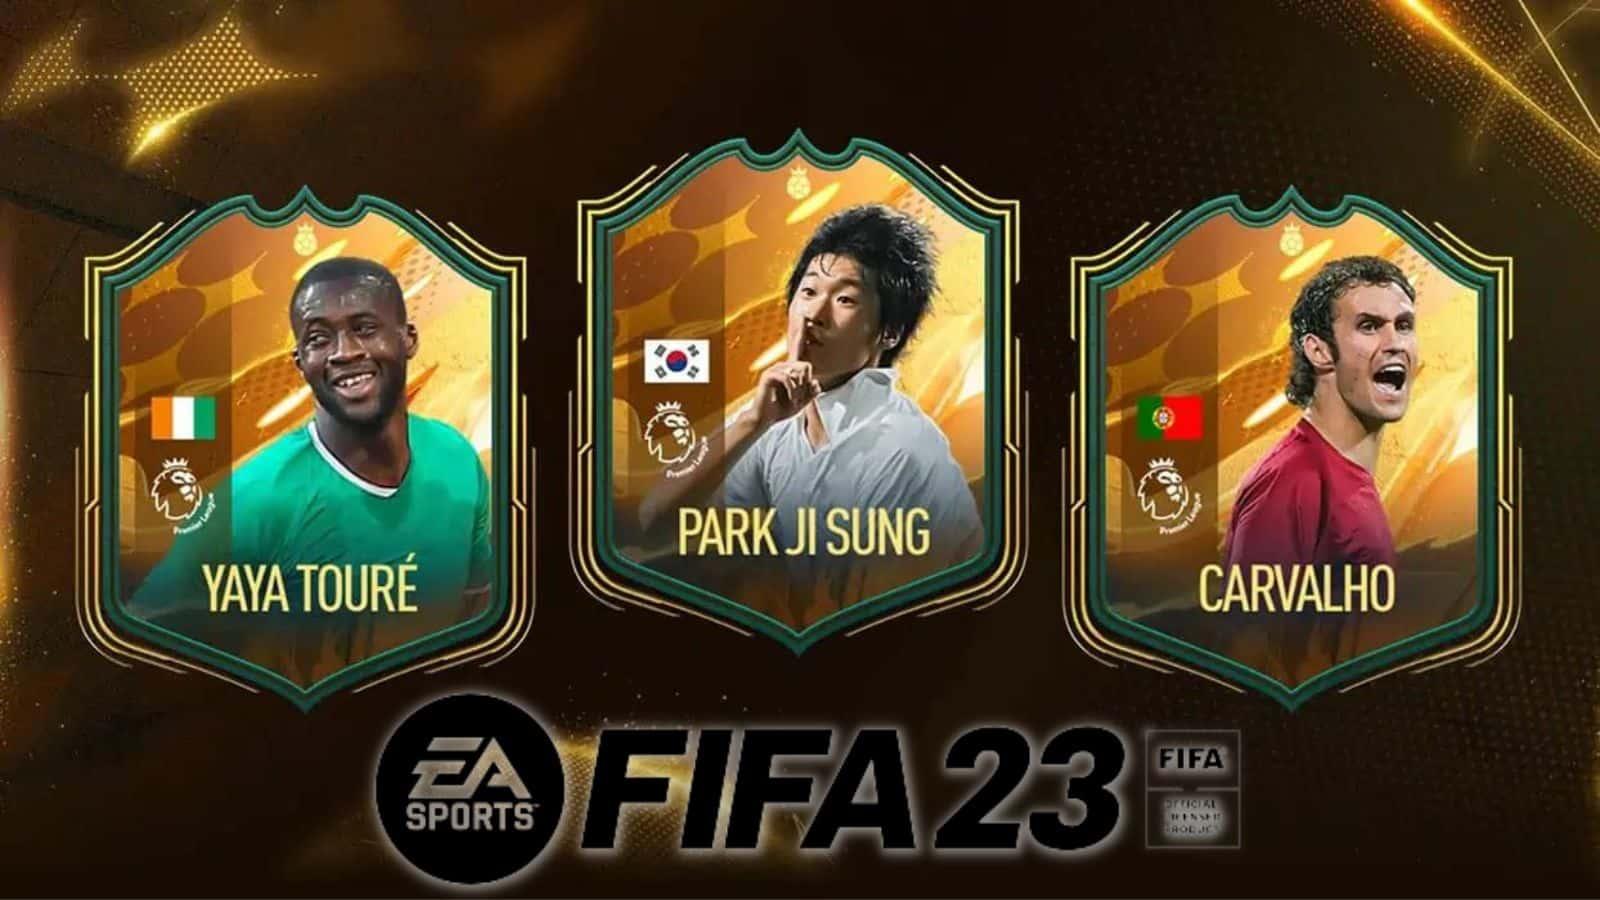 Lúcio, Gomez, Touré - Hero Cards to try In FIFA 23 Ultimate Team